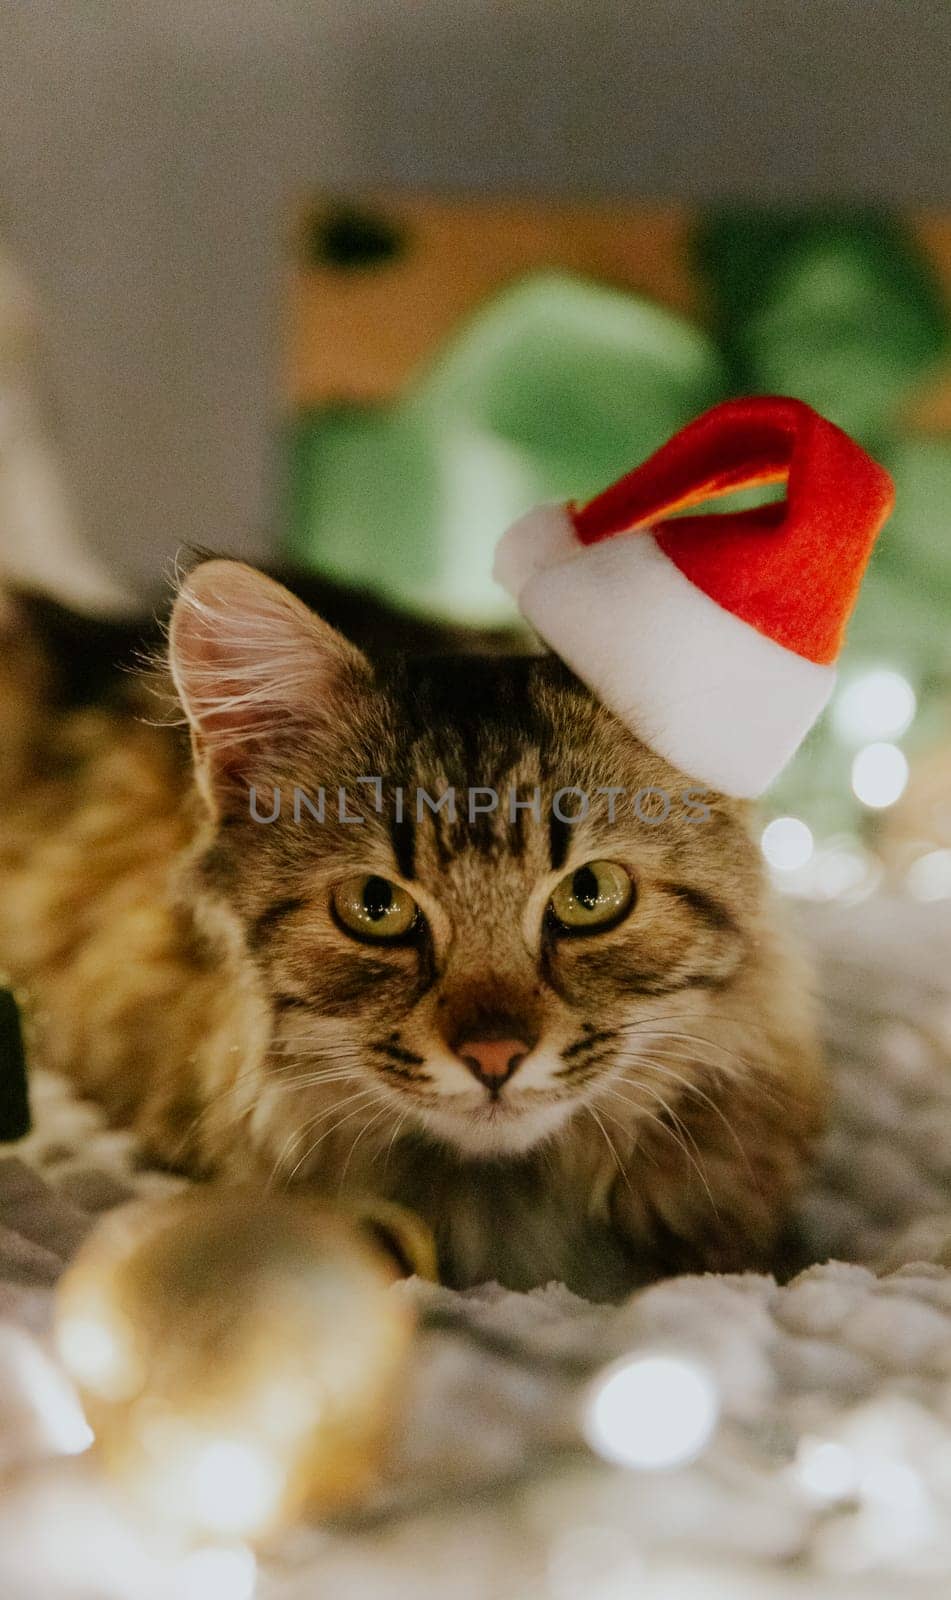 Portrait of one small brown fluffy kitten lying on the sofa at night with a Santa Claus hat on his head, burning garland, Christmas decor, looking at the camera in anticipation of the holiday, close-up side view.